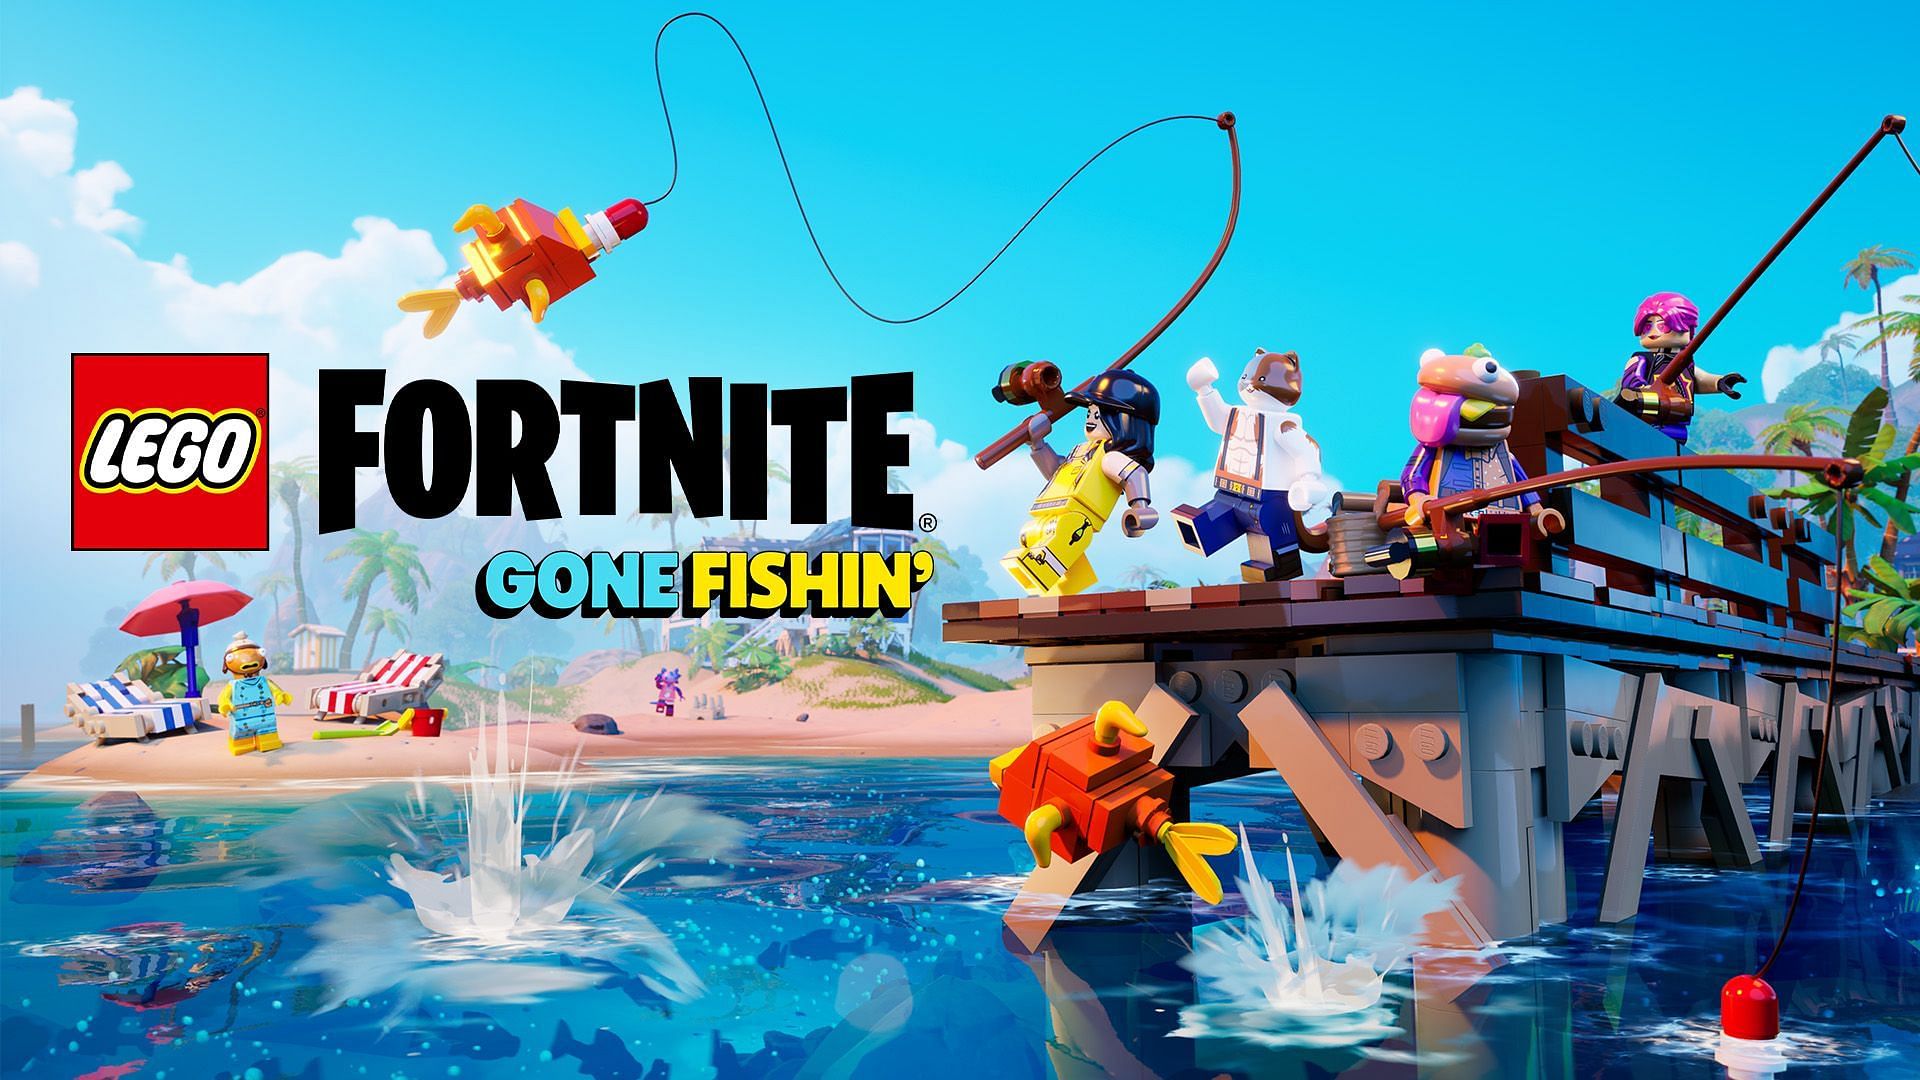 How to catch Fish in LEGO Fortnite (Image via Epic Games/LEGO Fortnite)